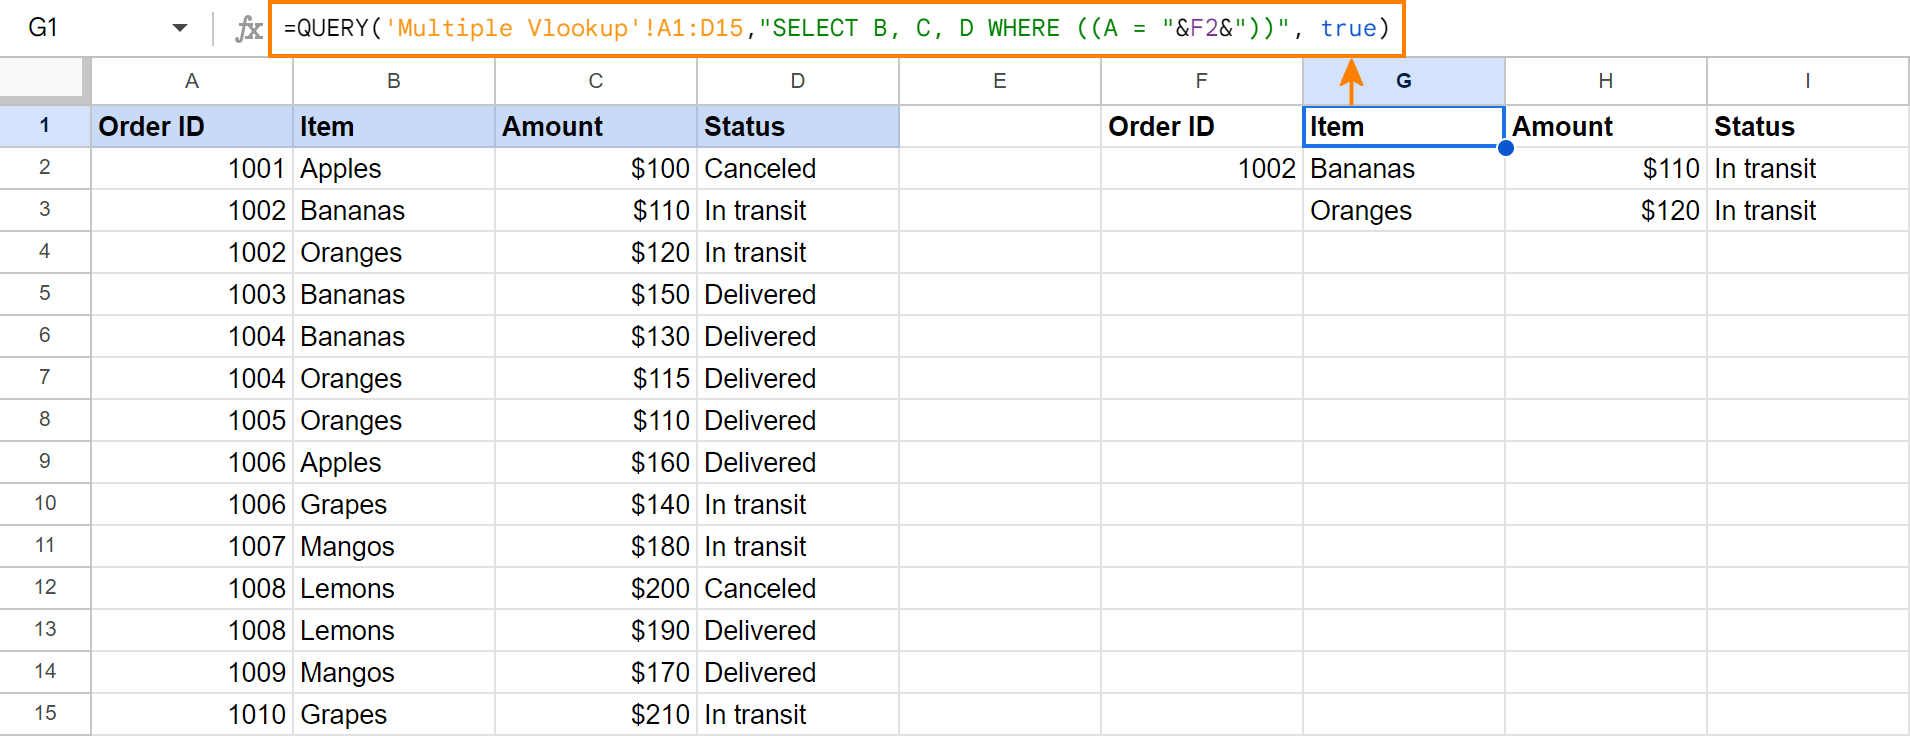 The formula to return multiple matches in Google Sheets